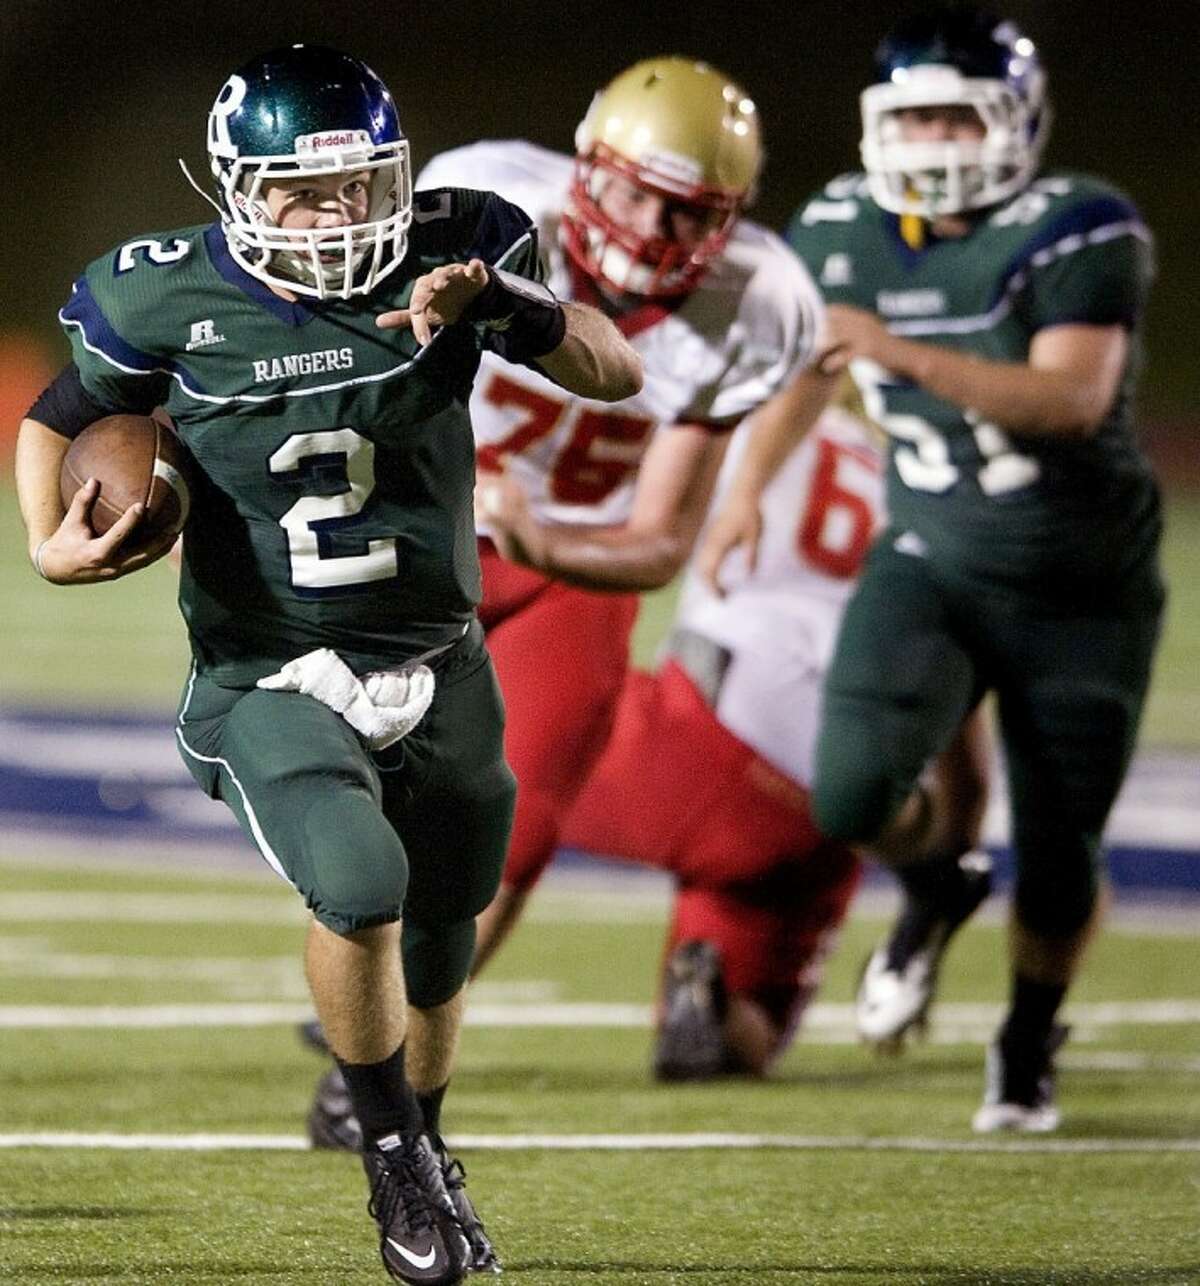 Rudder quarterback Luke Piper runs for a first down on fourth down during the third quarter on Friday.